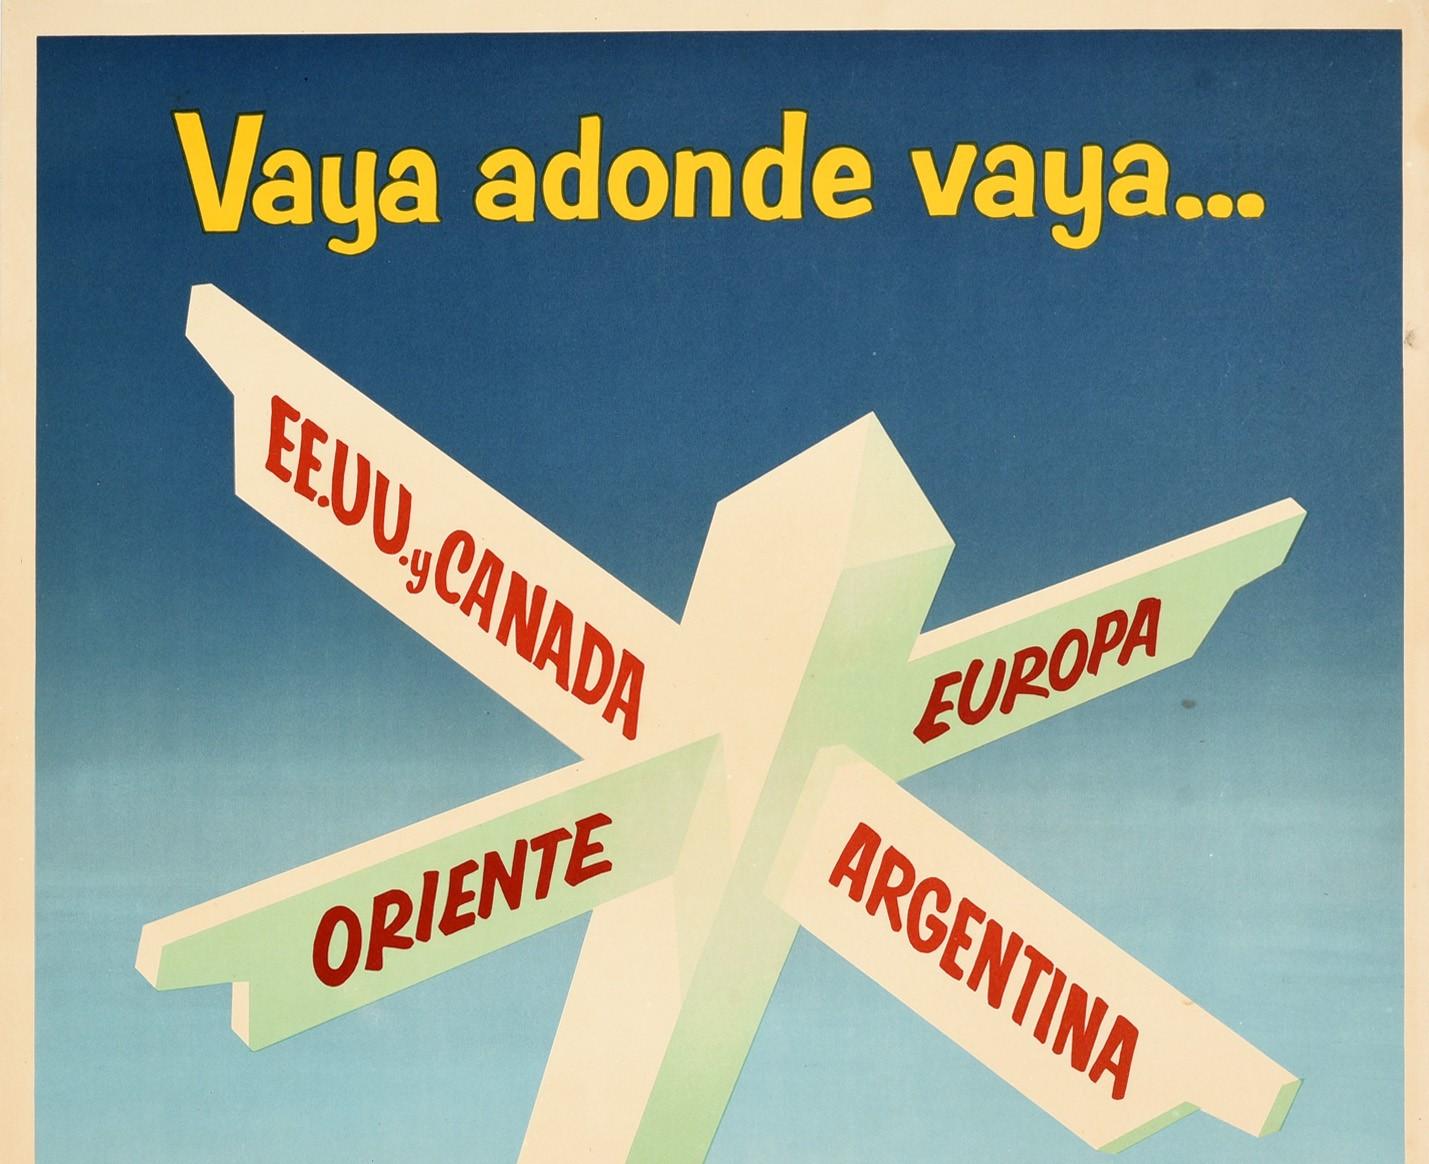 Original vintage travel advertising poster - Vaya donde vaya... Vuele via Panagra / Wherever you go... Fly via Panagra featuring a great design depicting a sign post marked Oriente Europa Argentina EE.UU y Canada / Orient Europe Argentina USA and